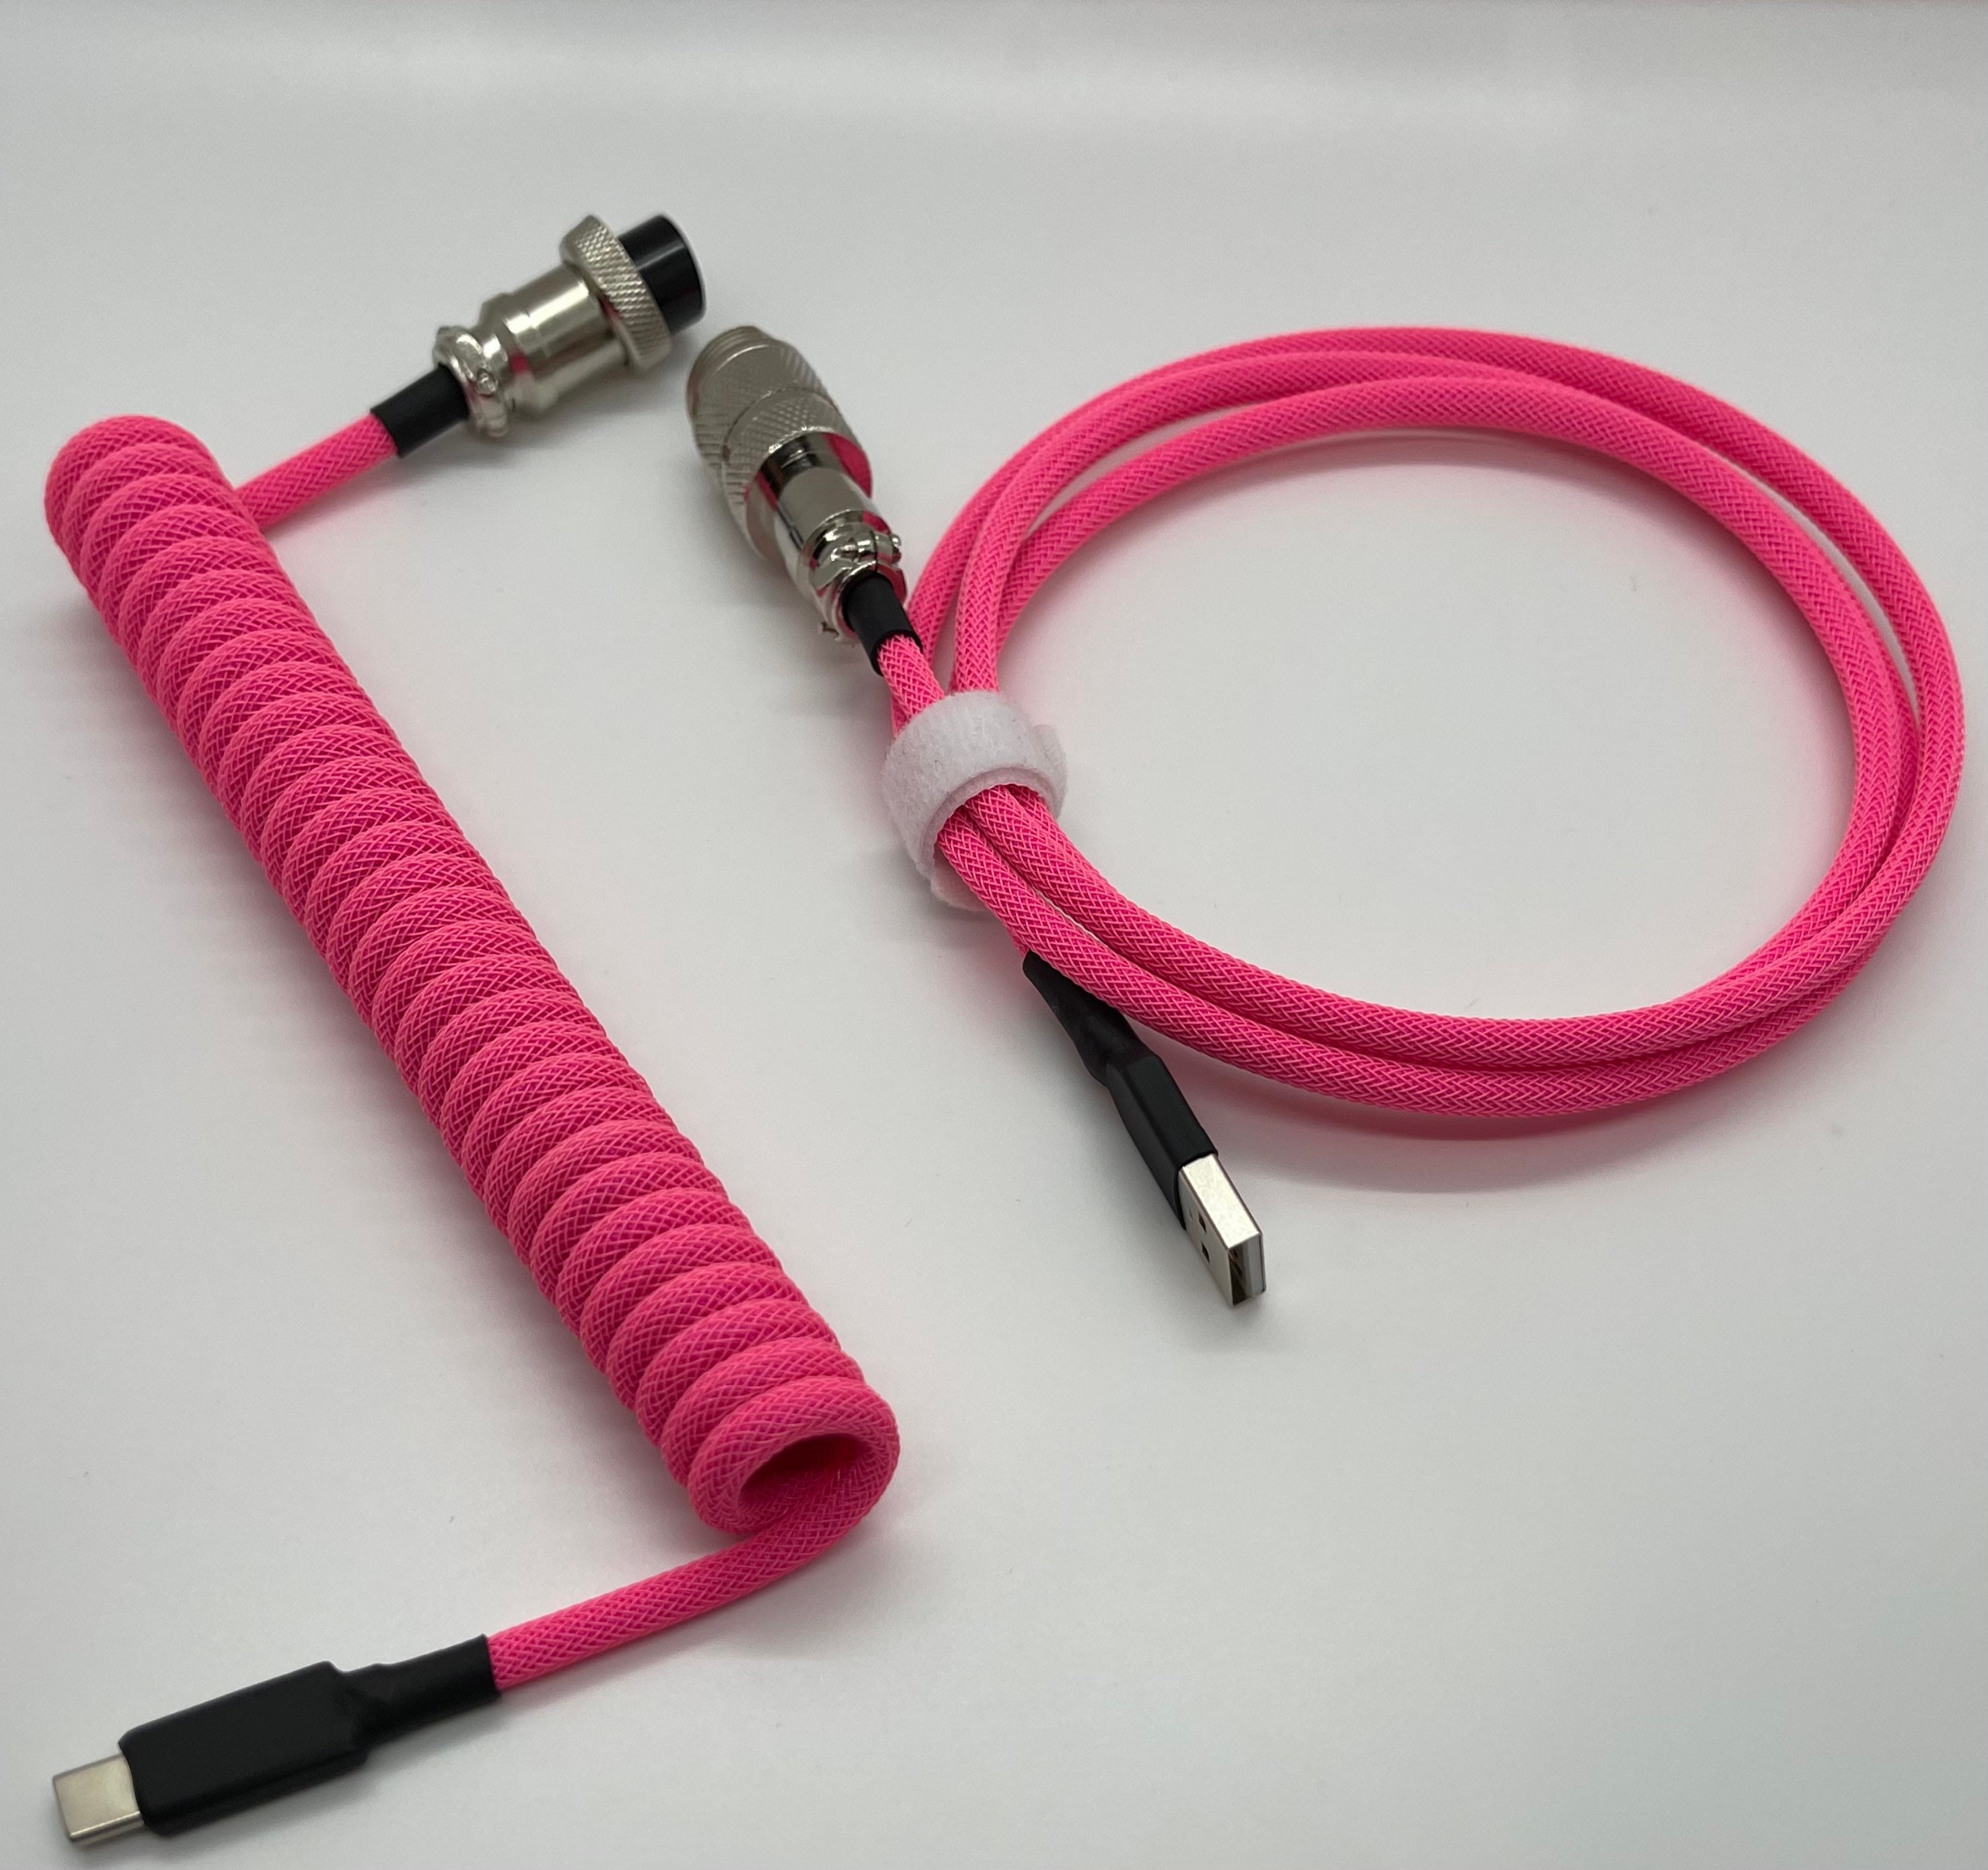 hokistudio Custom Coiled Type C USB Cable for Mechanical Keyboard Handwork  Braided XLR Connector Spiral Paracord 100cm Version(Pink Purple)